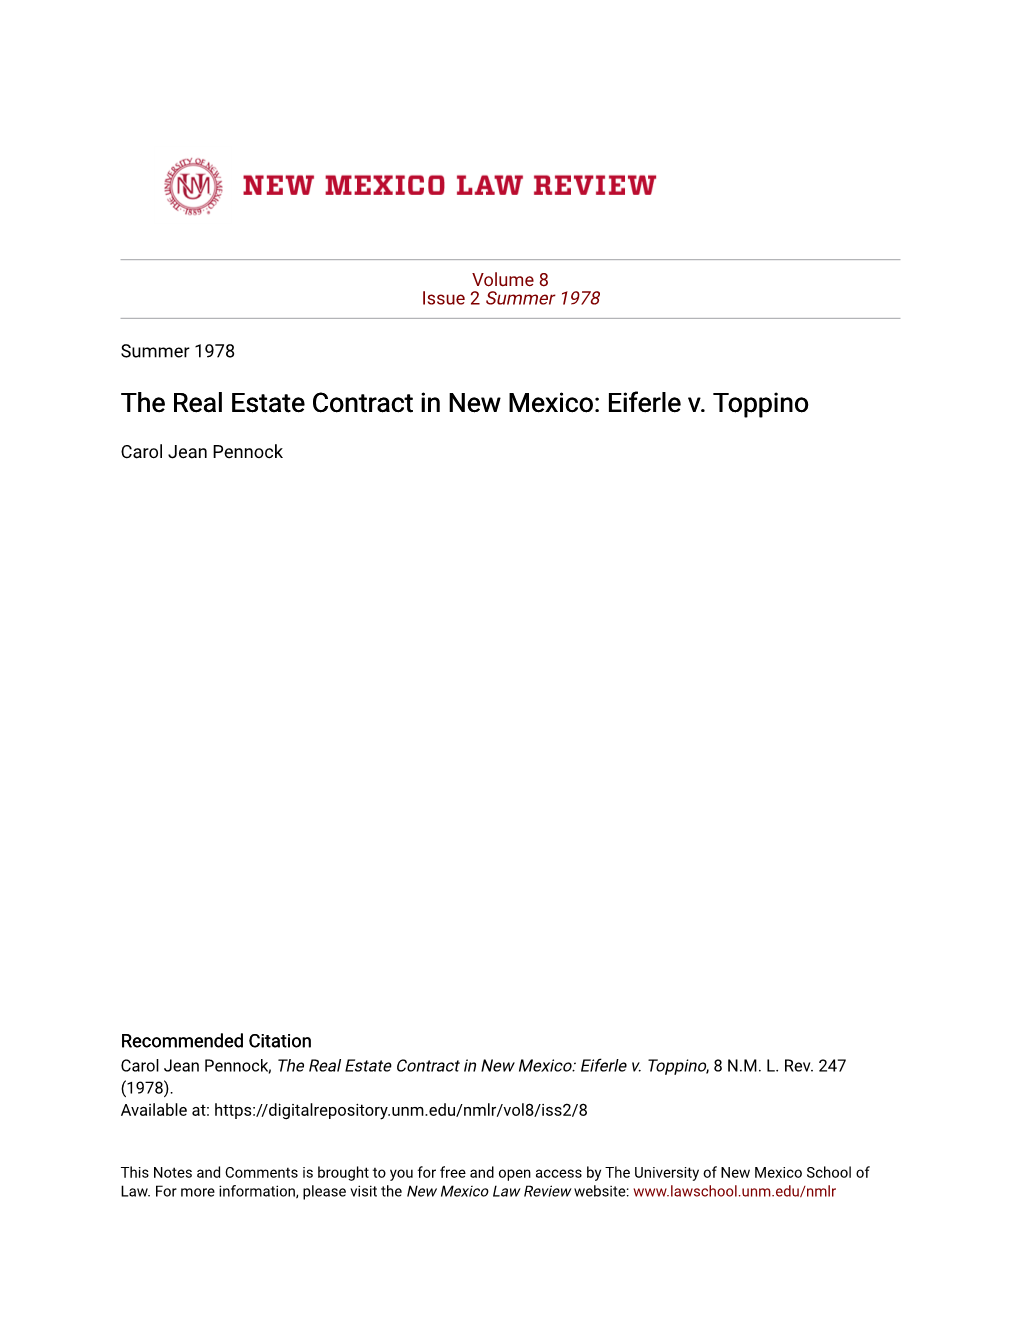 The Real Estate Contract in New Mexico: Eiferle V. Toppino